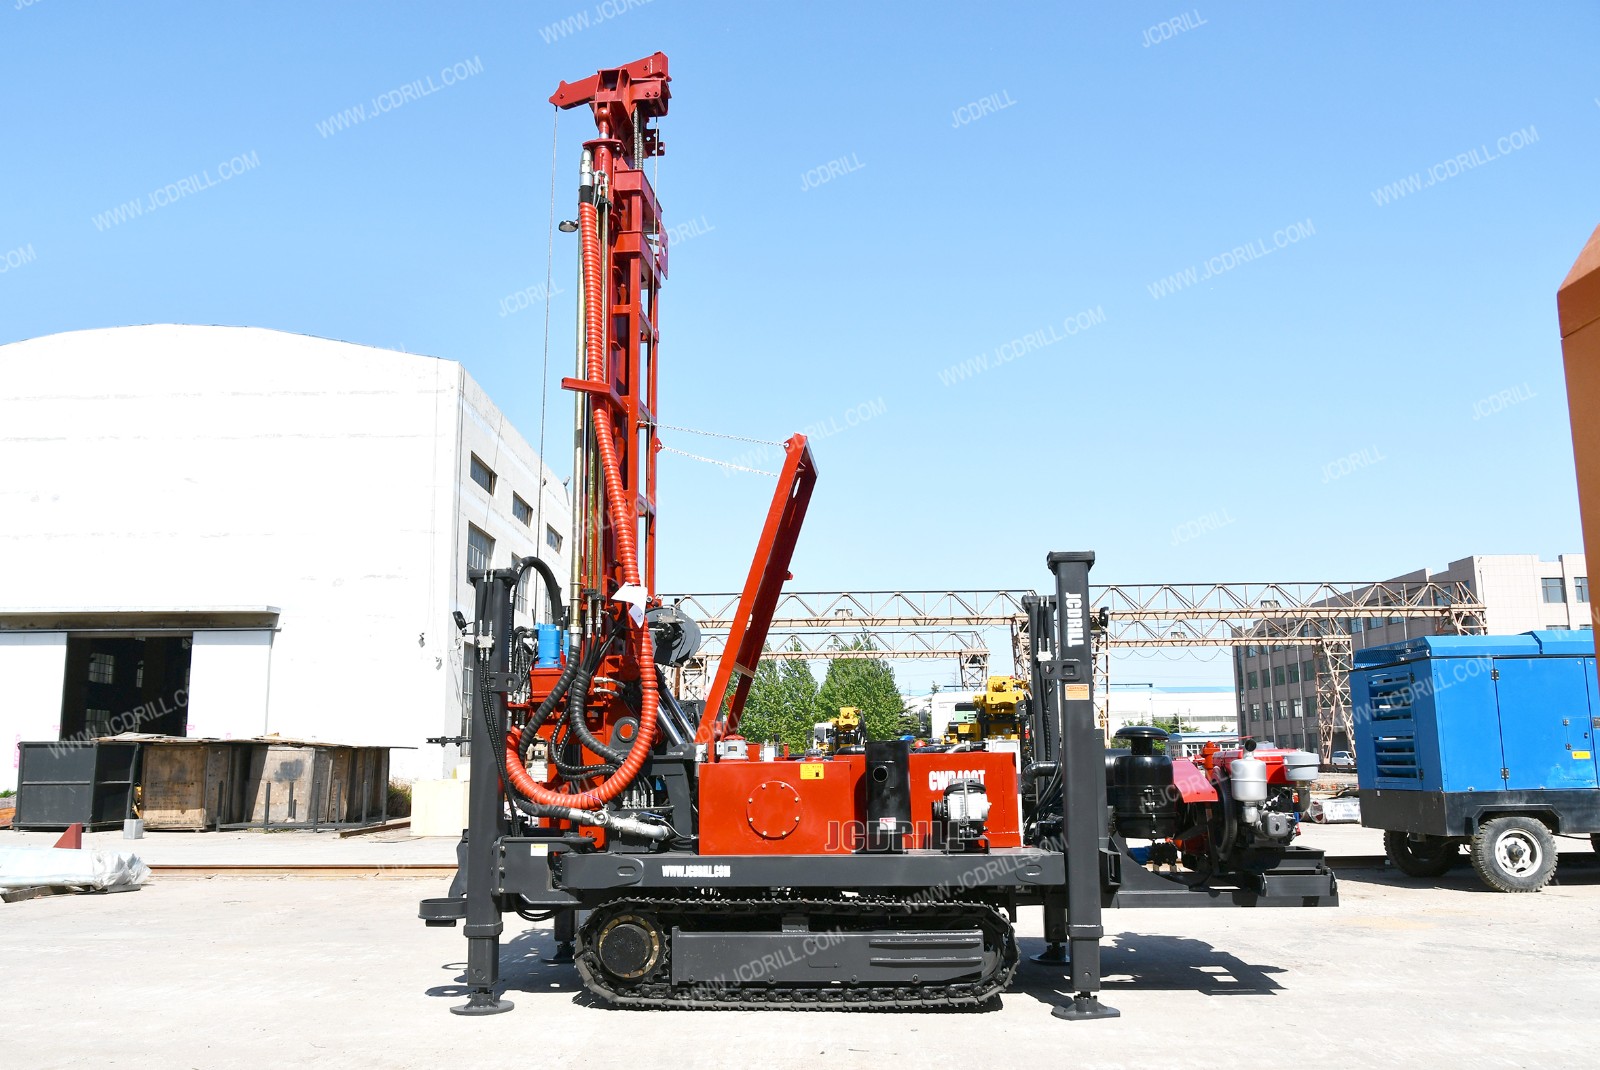 JCDRILL Crawler-mounted Water Well Drilling Rig: A Technical Overview